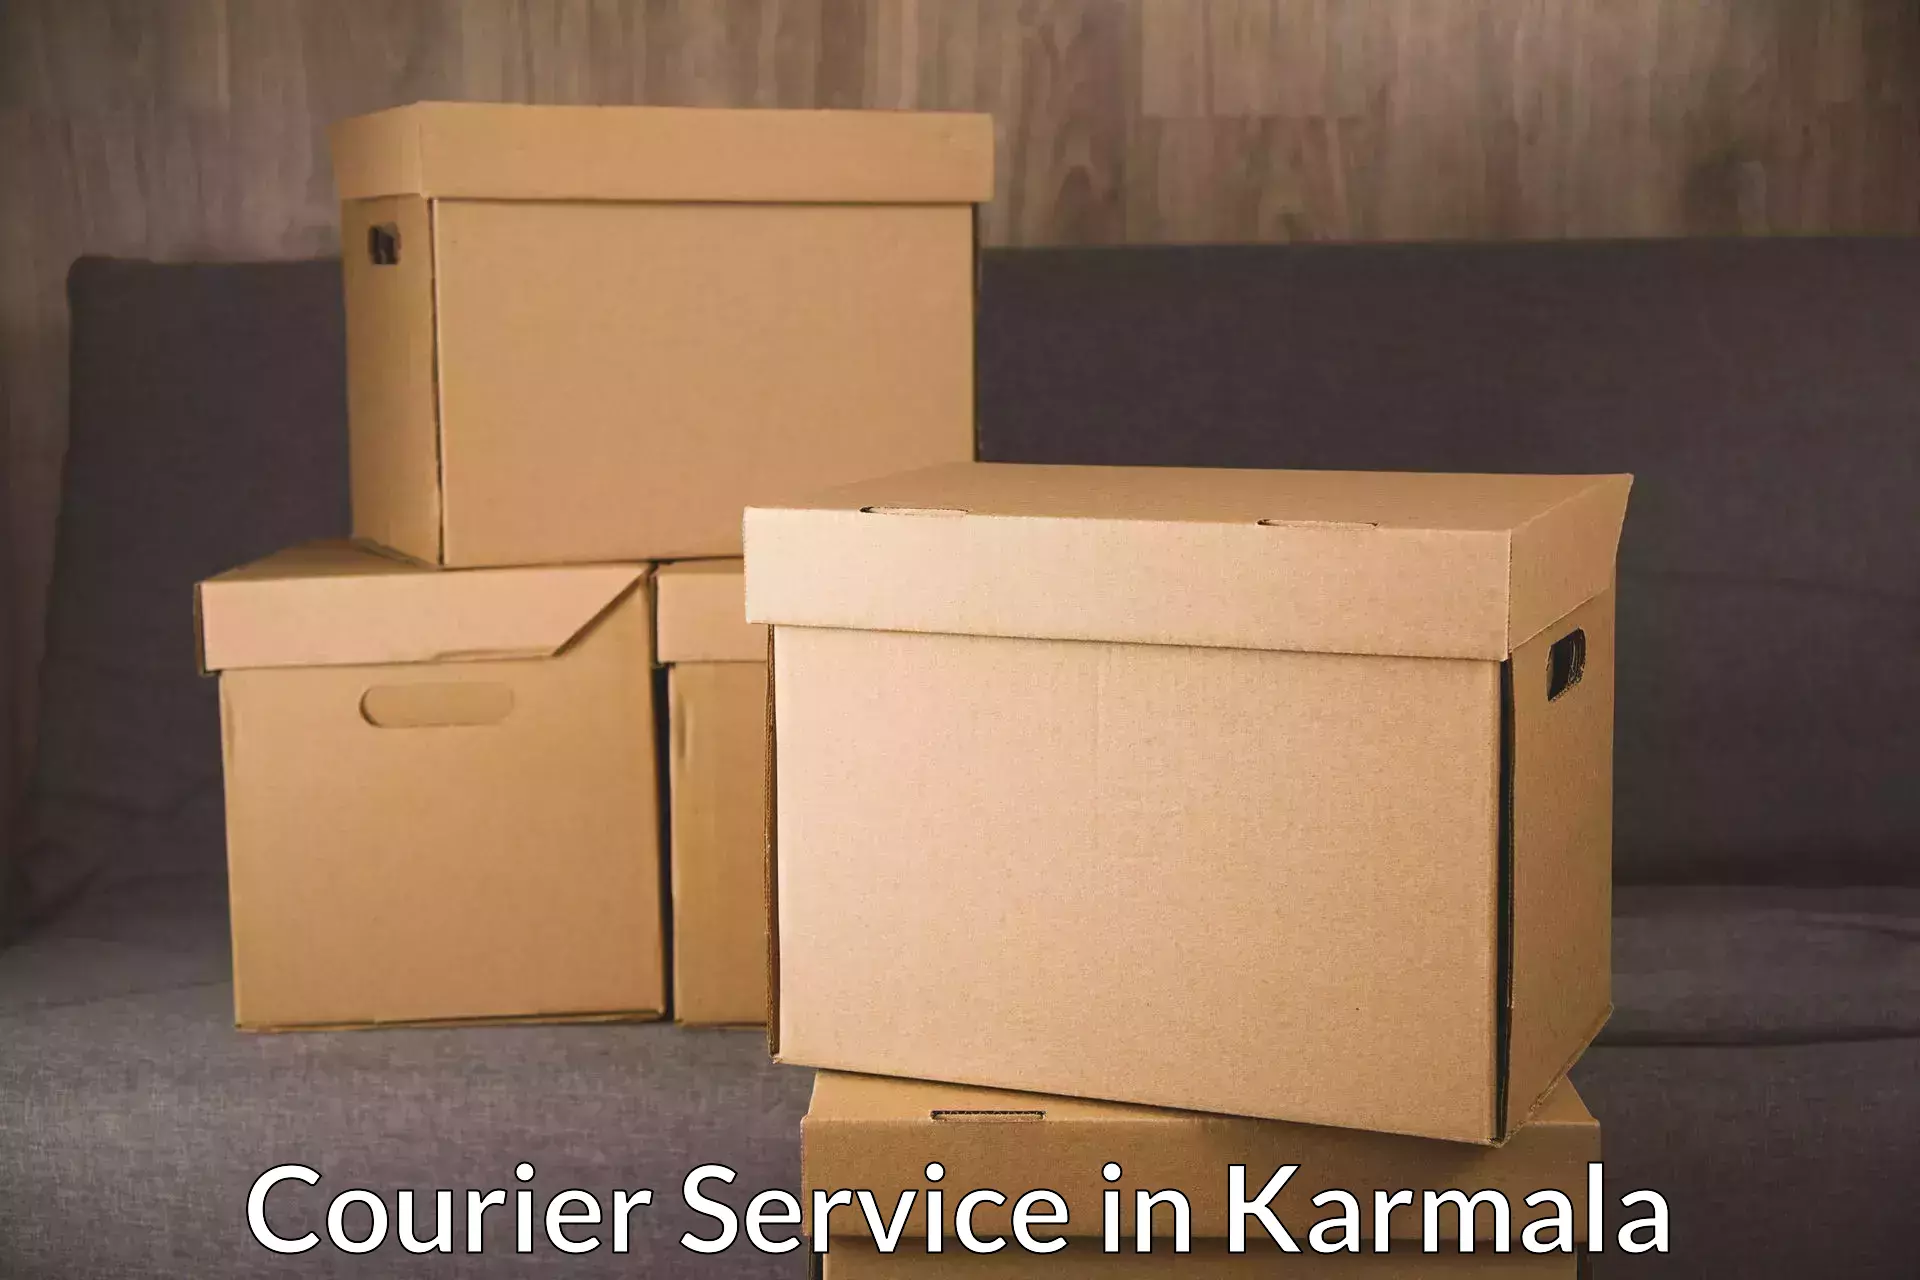 Personal parcel delivery in Karmala